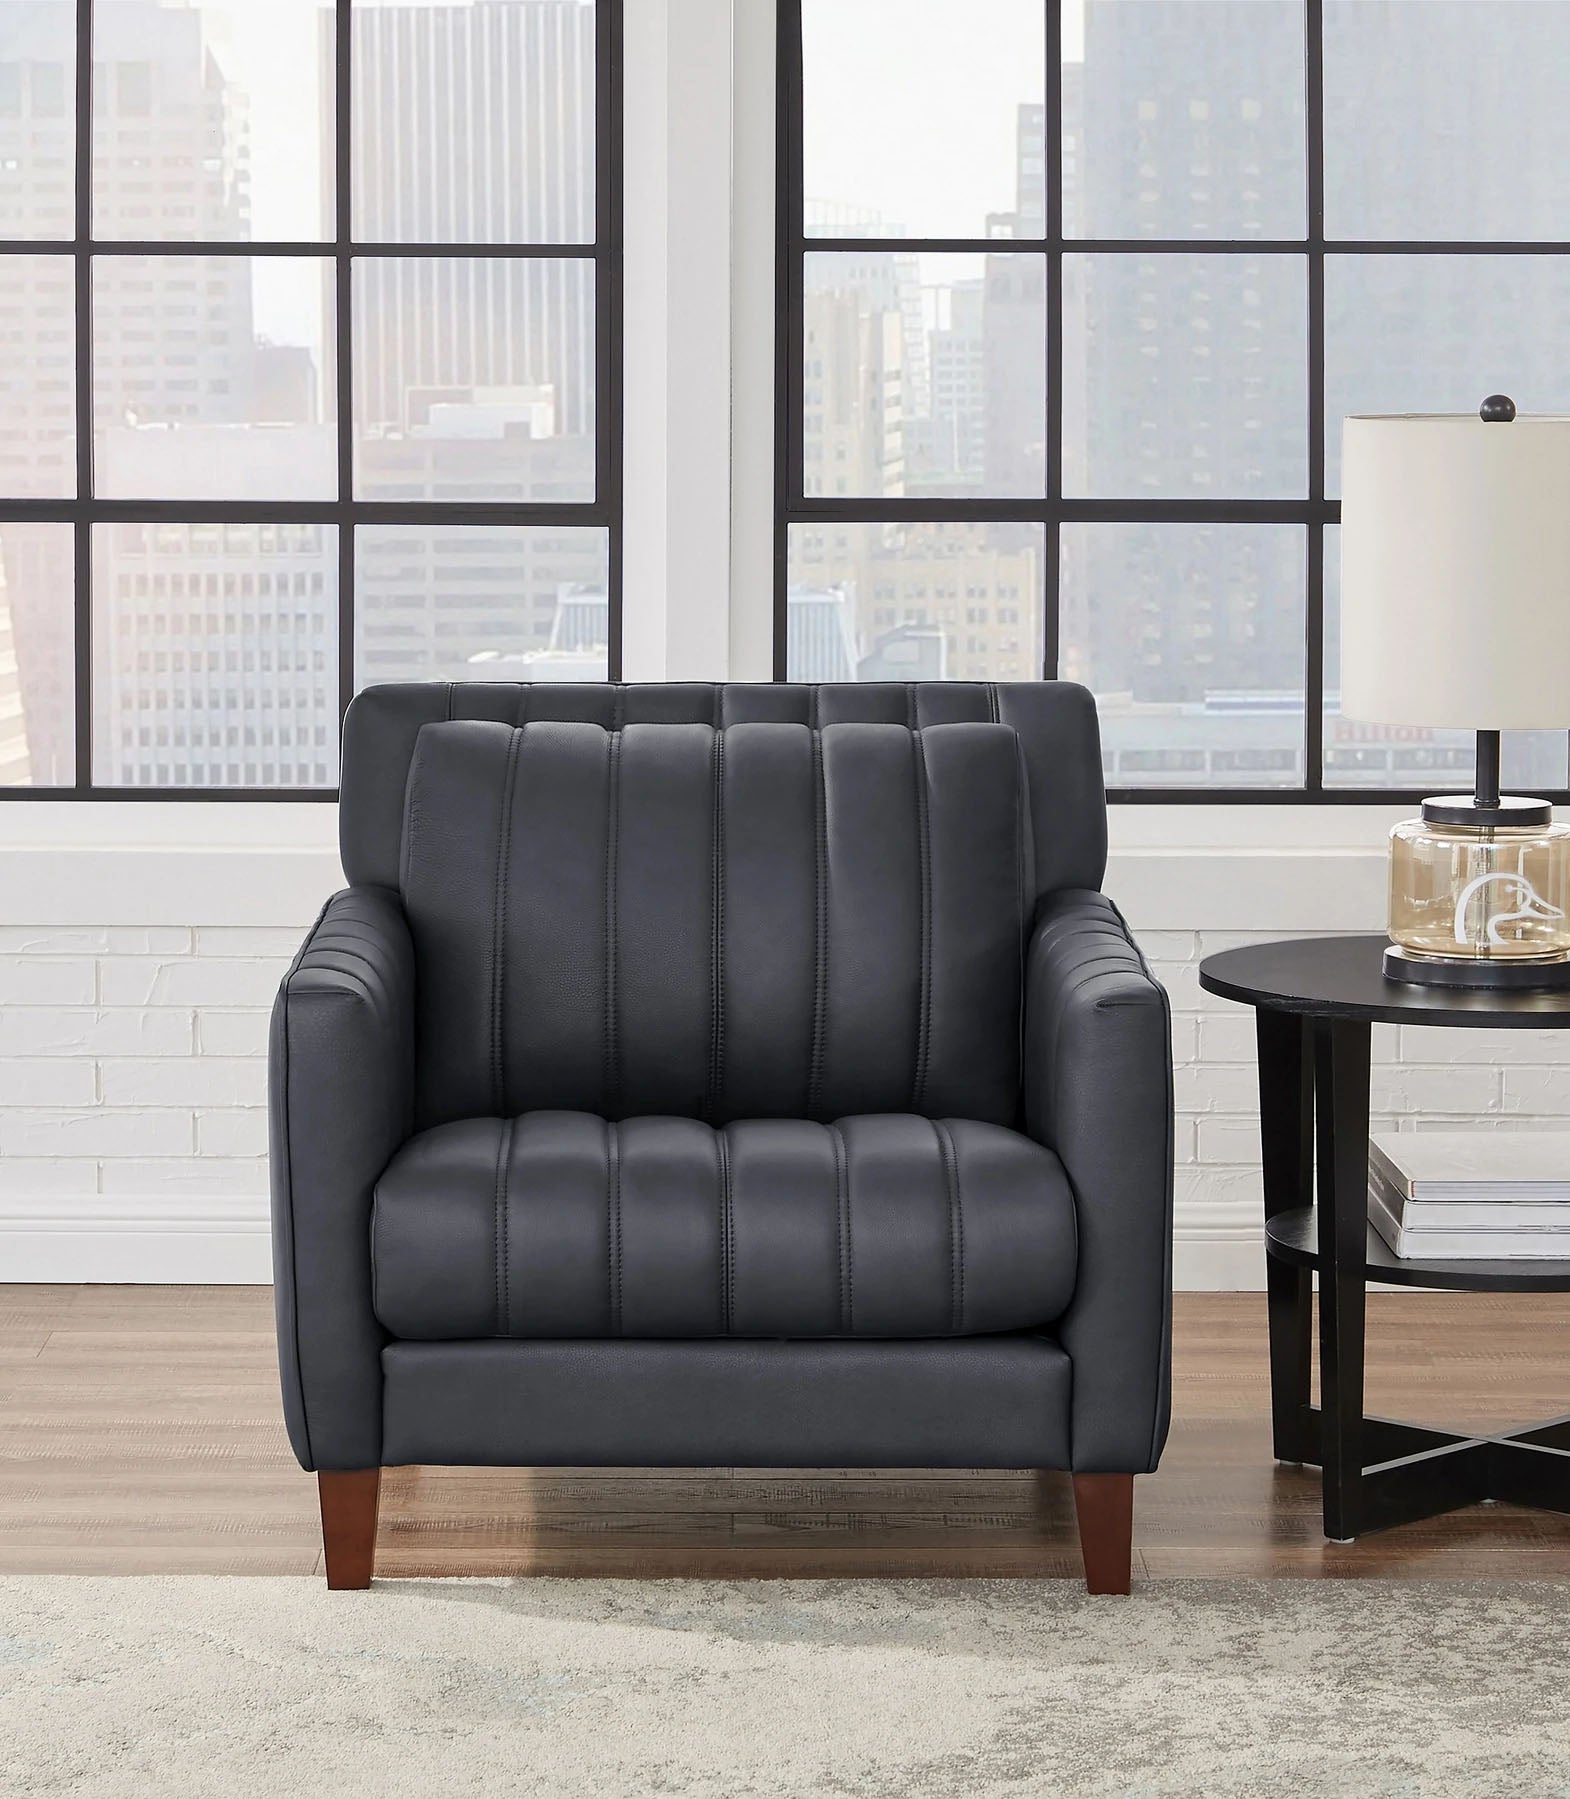 Ross Gray Leather Chair - MJM Furniture